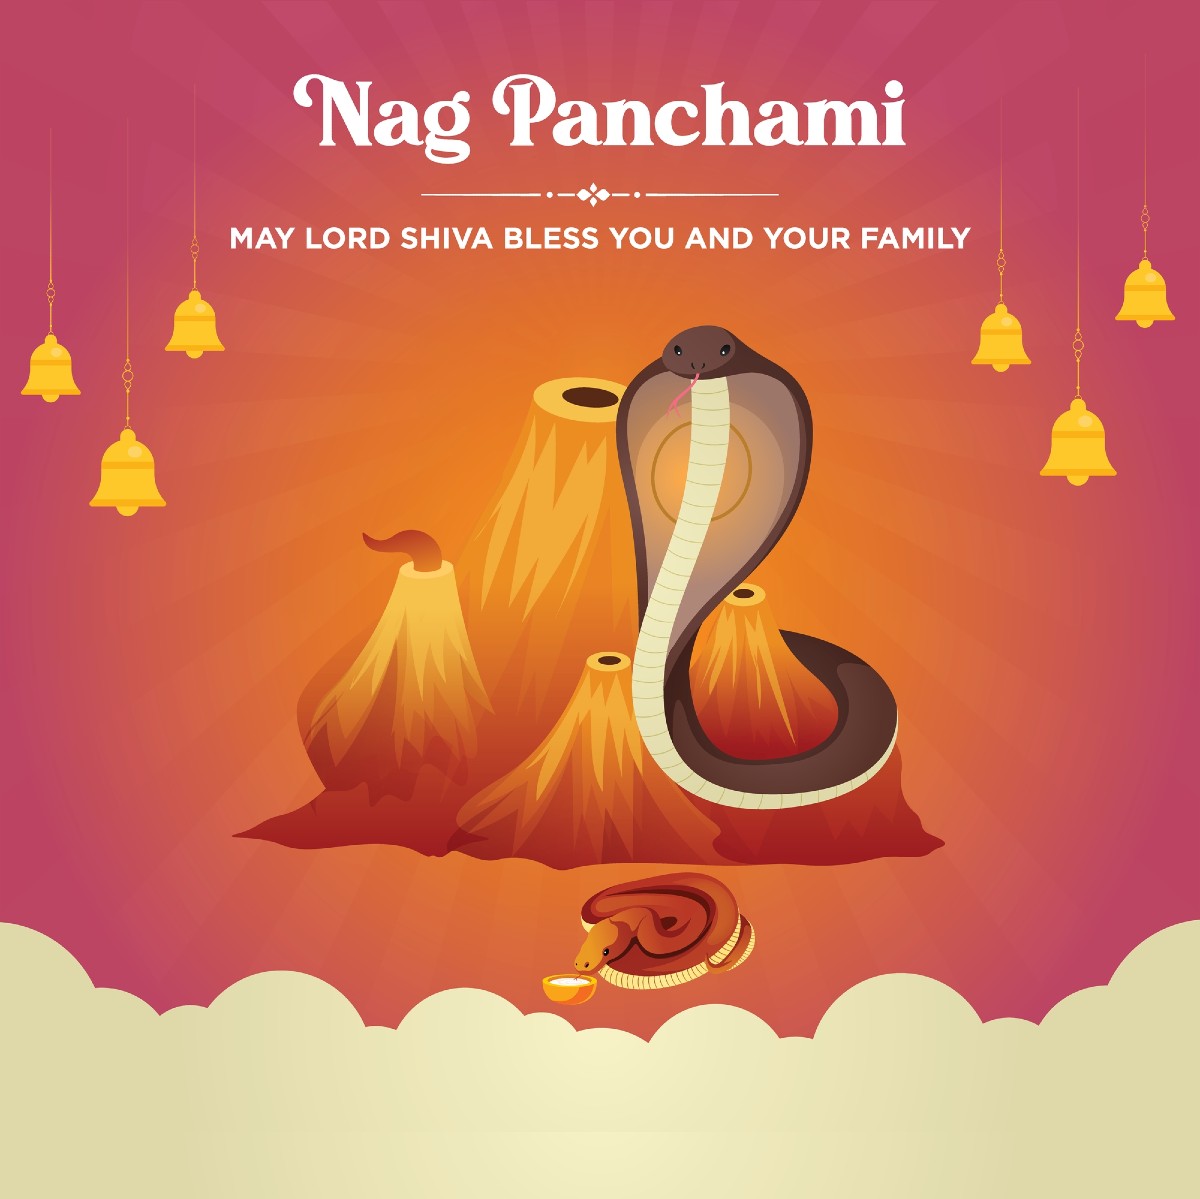 Happy Nag Panchami 2021 Images, Wishes, Quotes, Messages » statusmarket